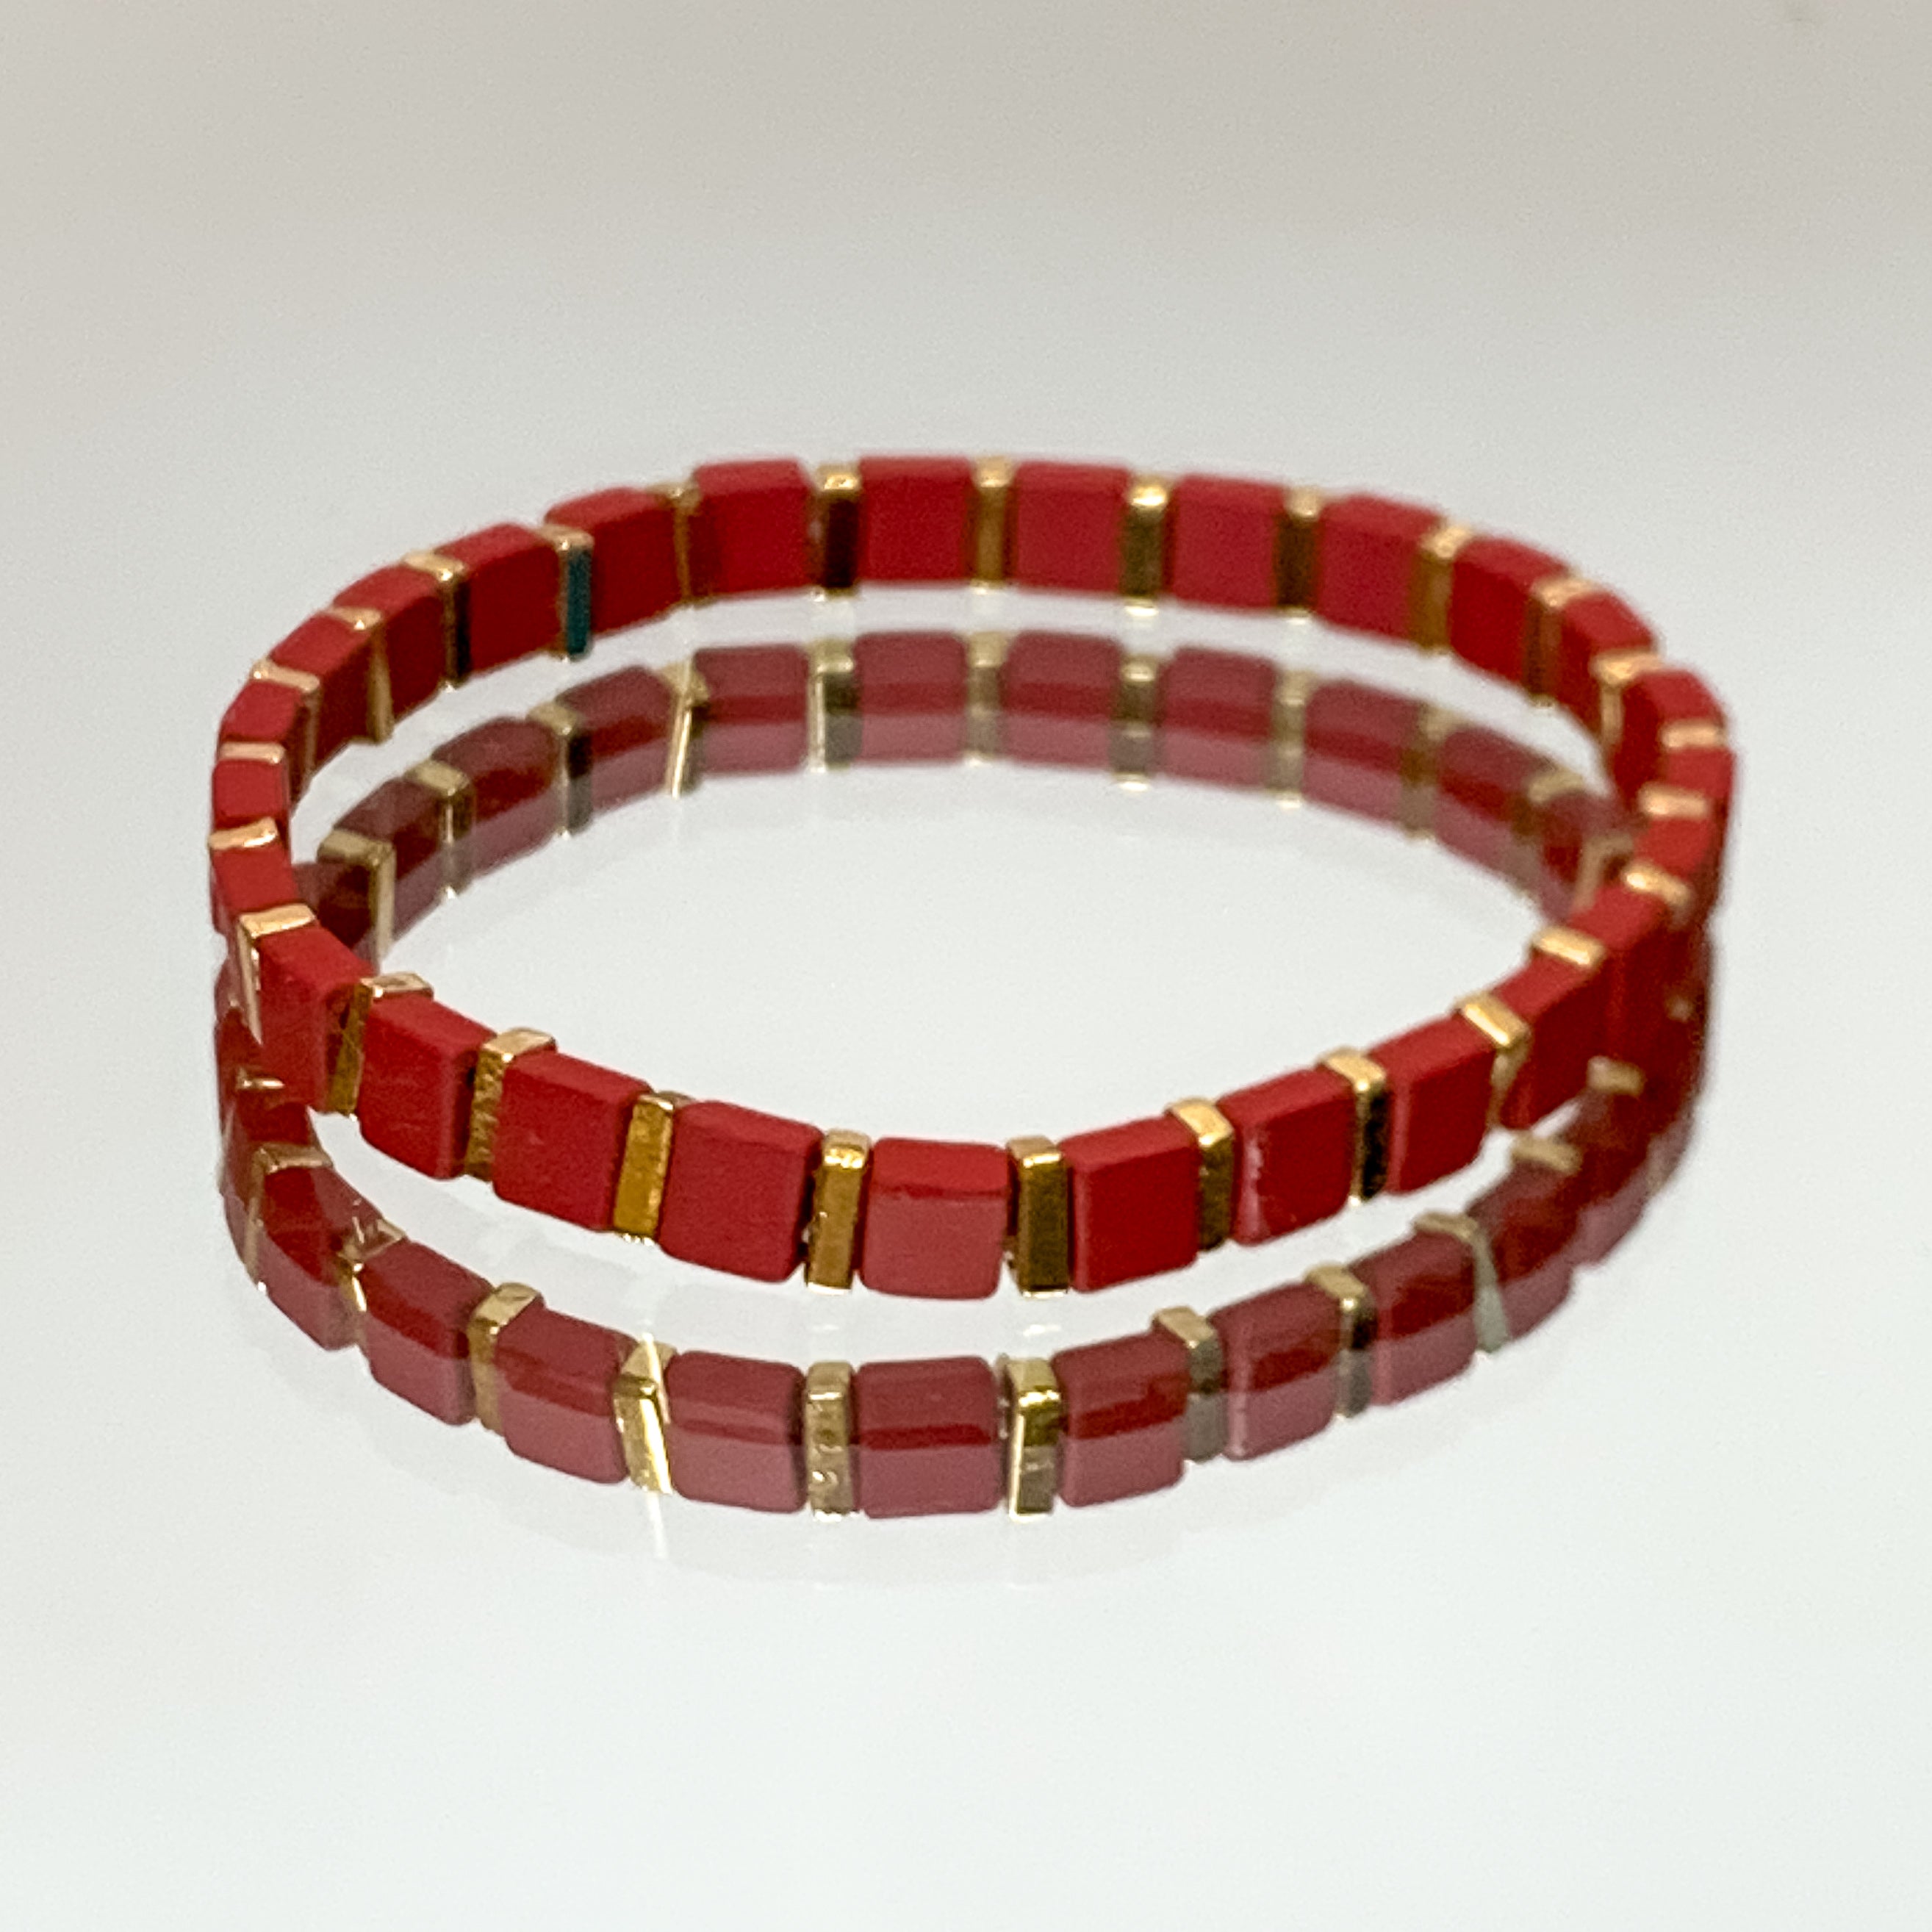 All About Matte Skinny Square Bracelet in Red - Giddy Up Glamour Boutique